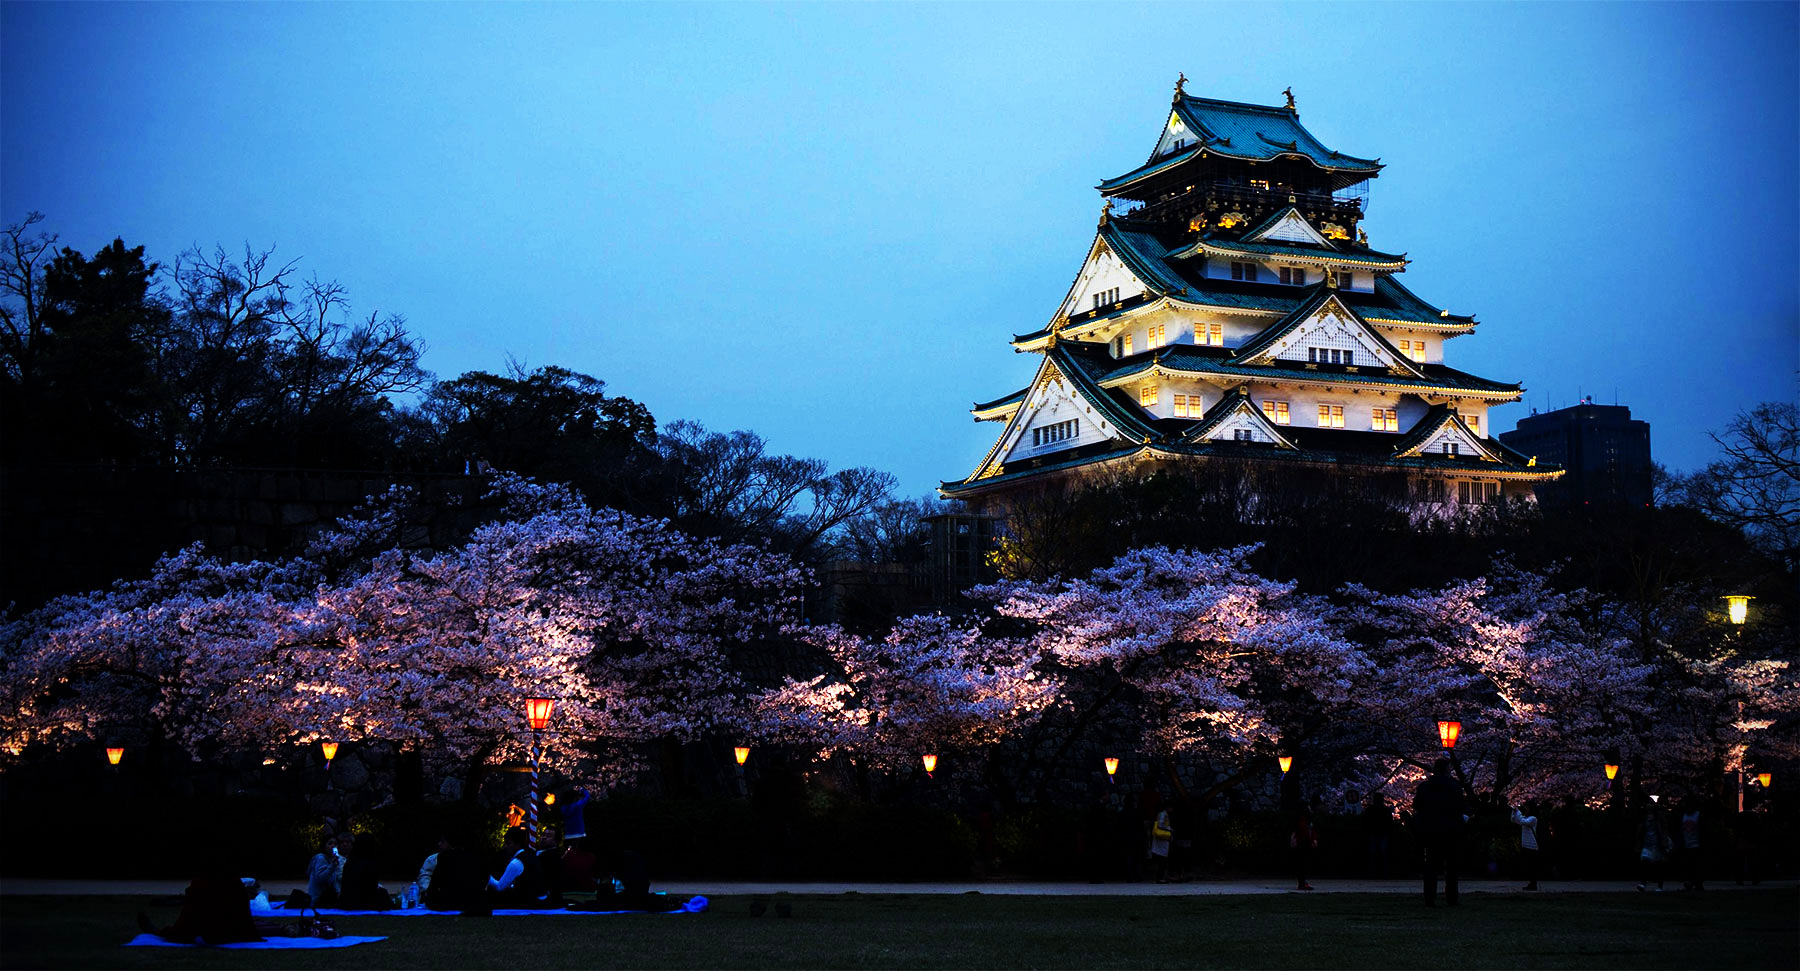 Free Download Osaka Castle Wallpaper Full Hd Pictures 1800x971 For Your Desktop Mobile Tablet Explore 72 Osaka Wallpaper Osaka Wallpaper Osaka Wallpapers